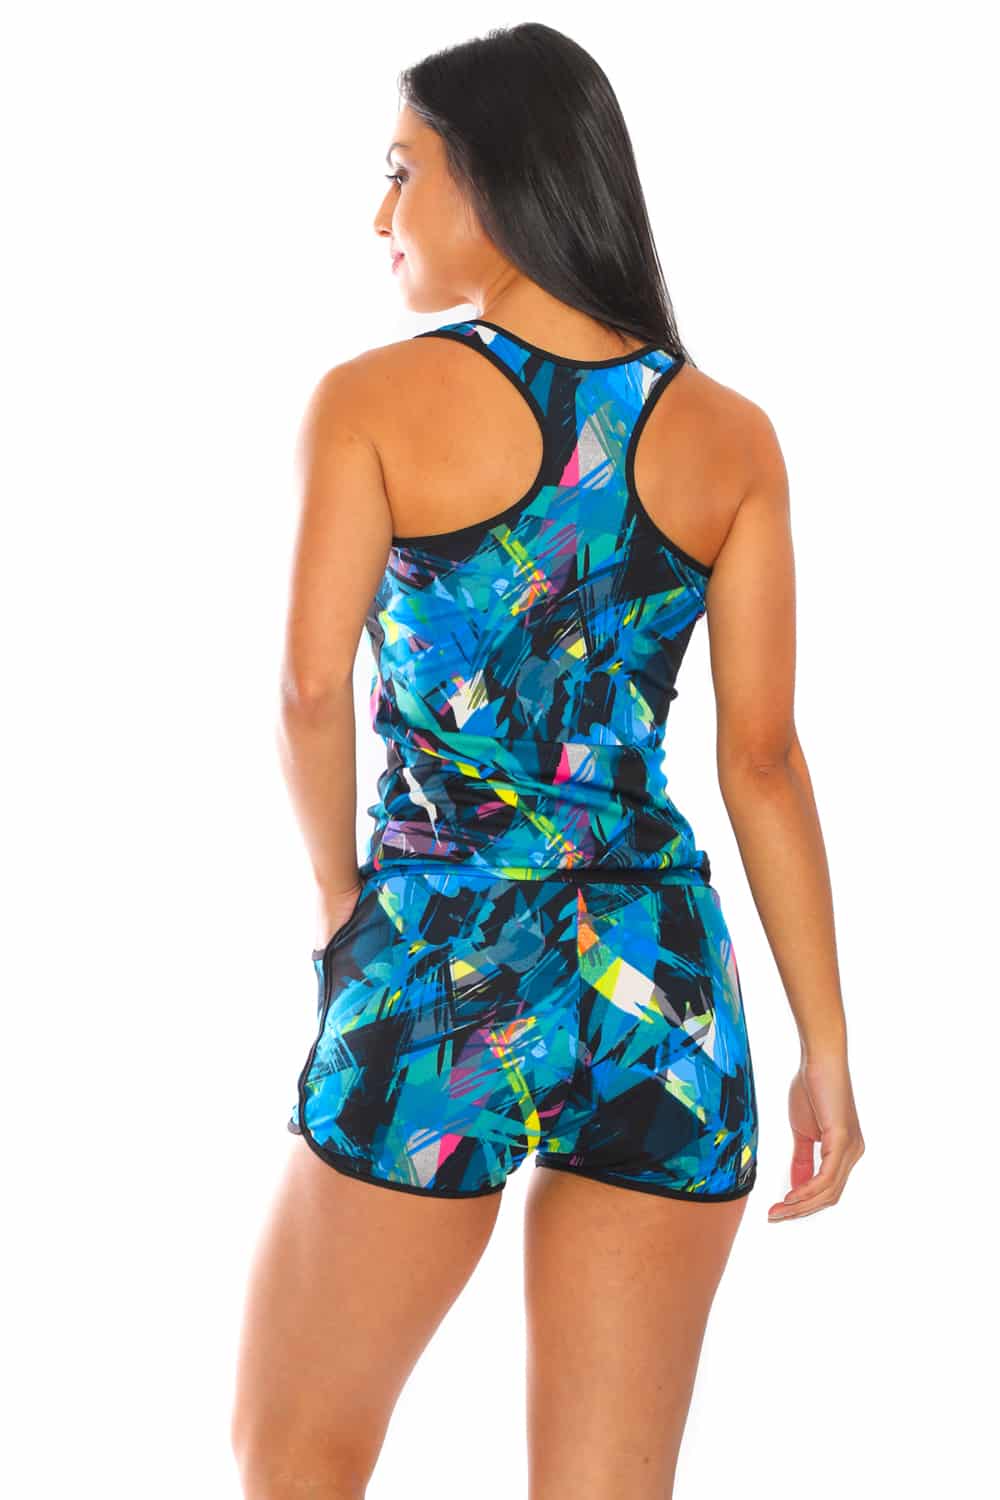 Activewear Set With a Racer Back Tank Top - 31